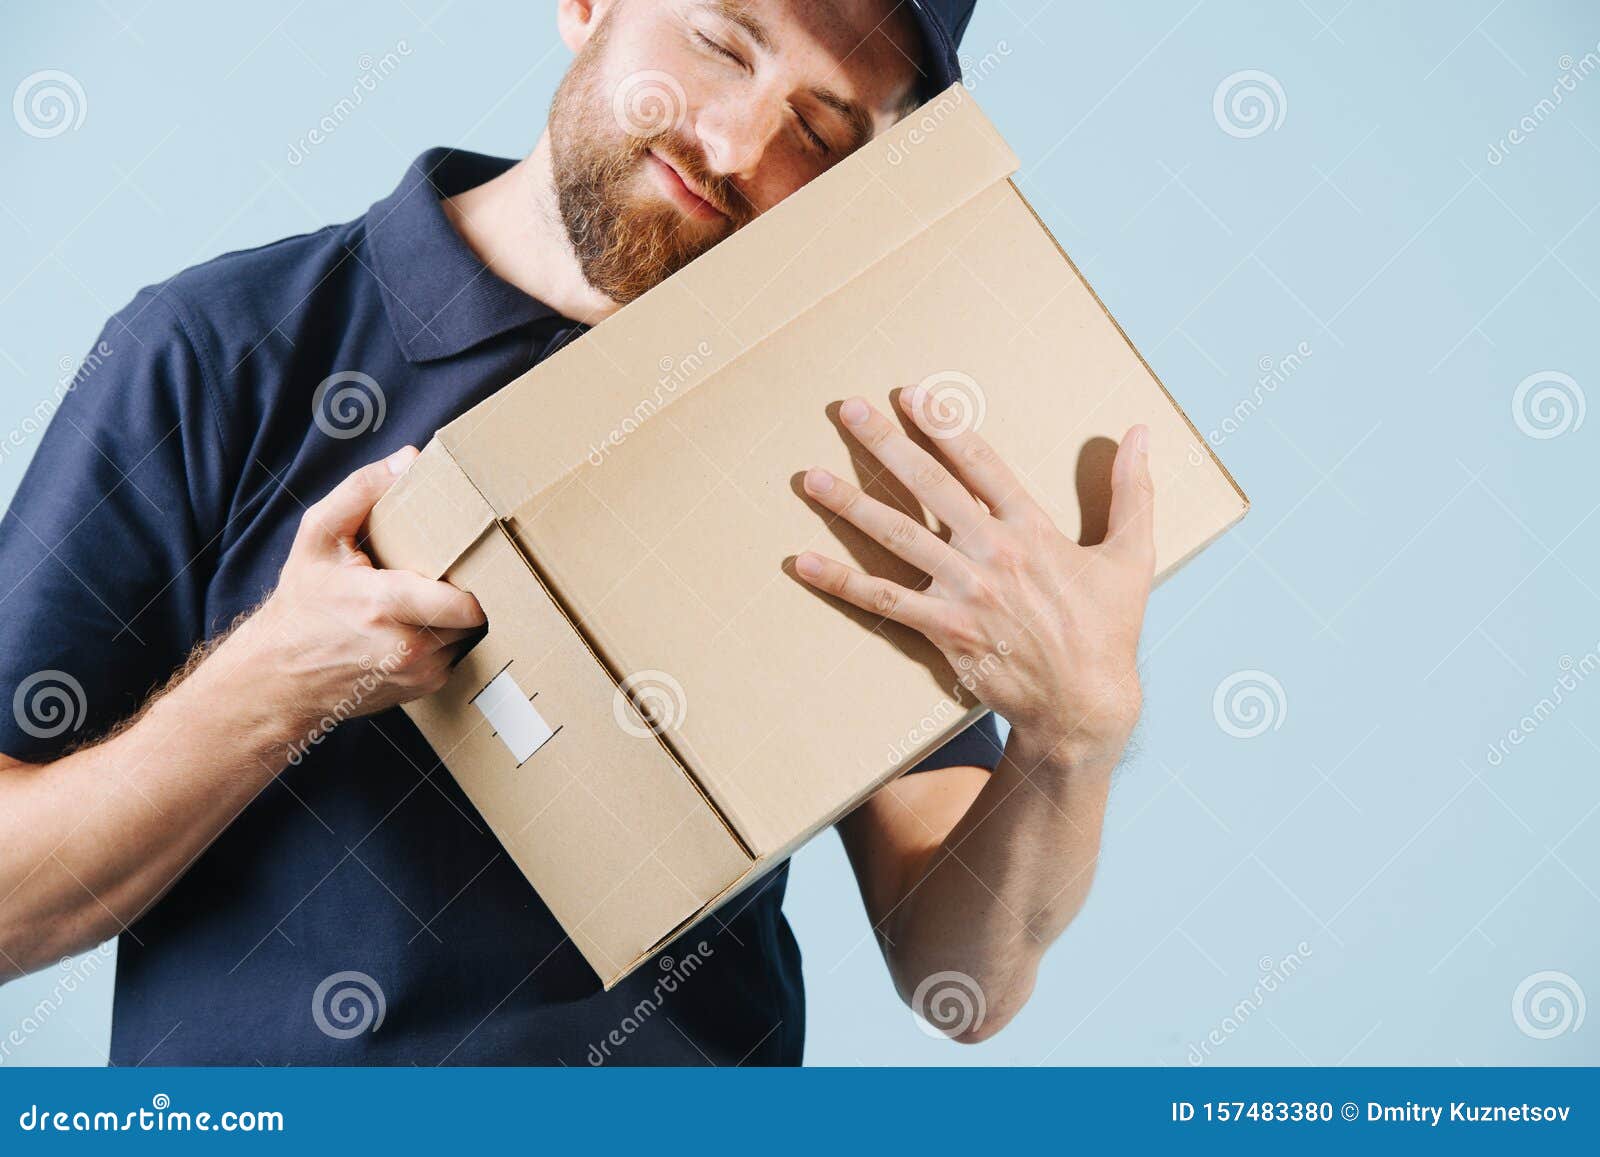 cheerful delivery man in uniform is hugging cardboard box with his eyes closed